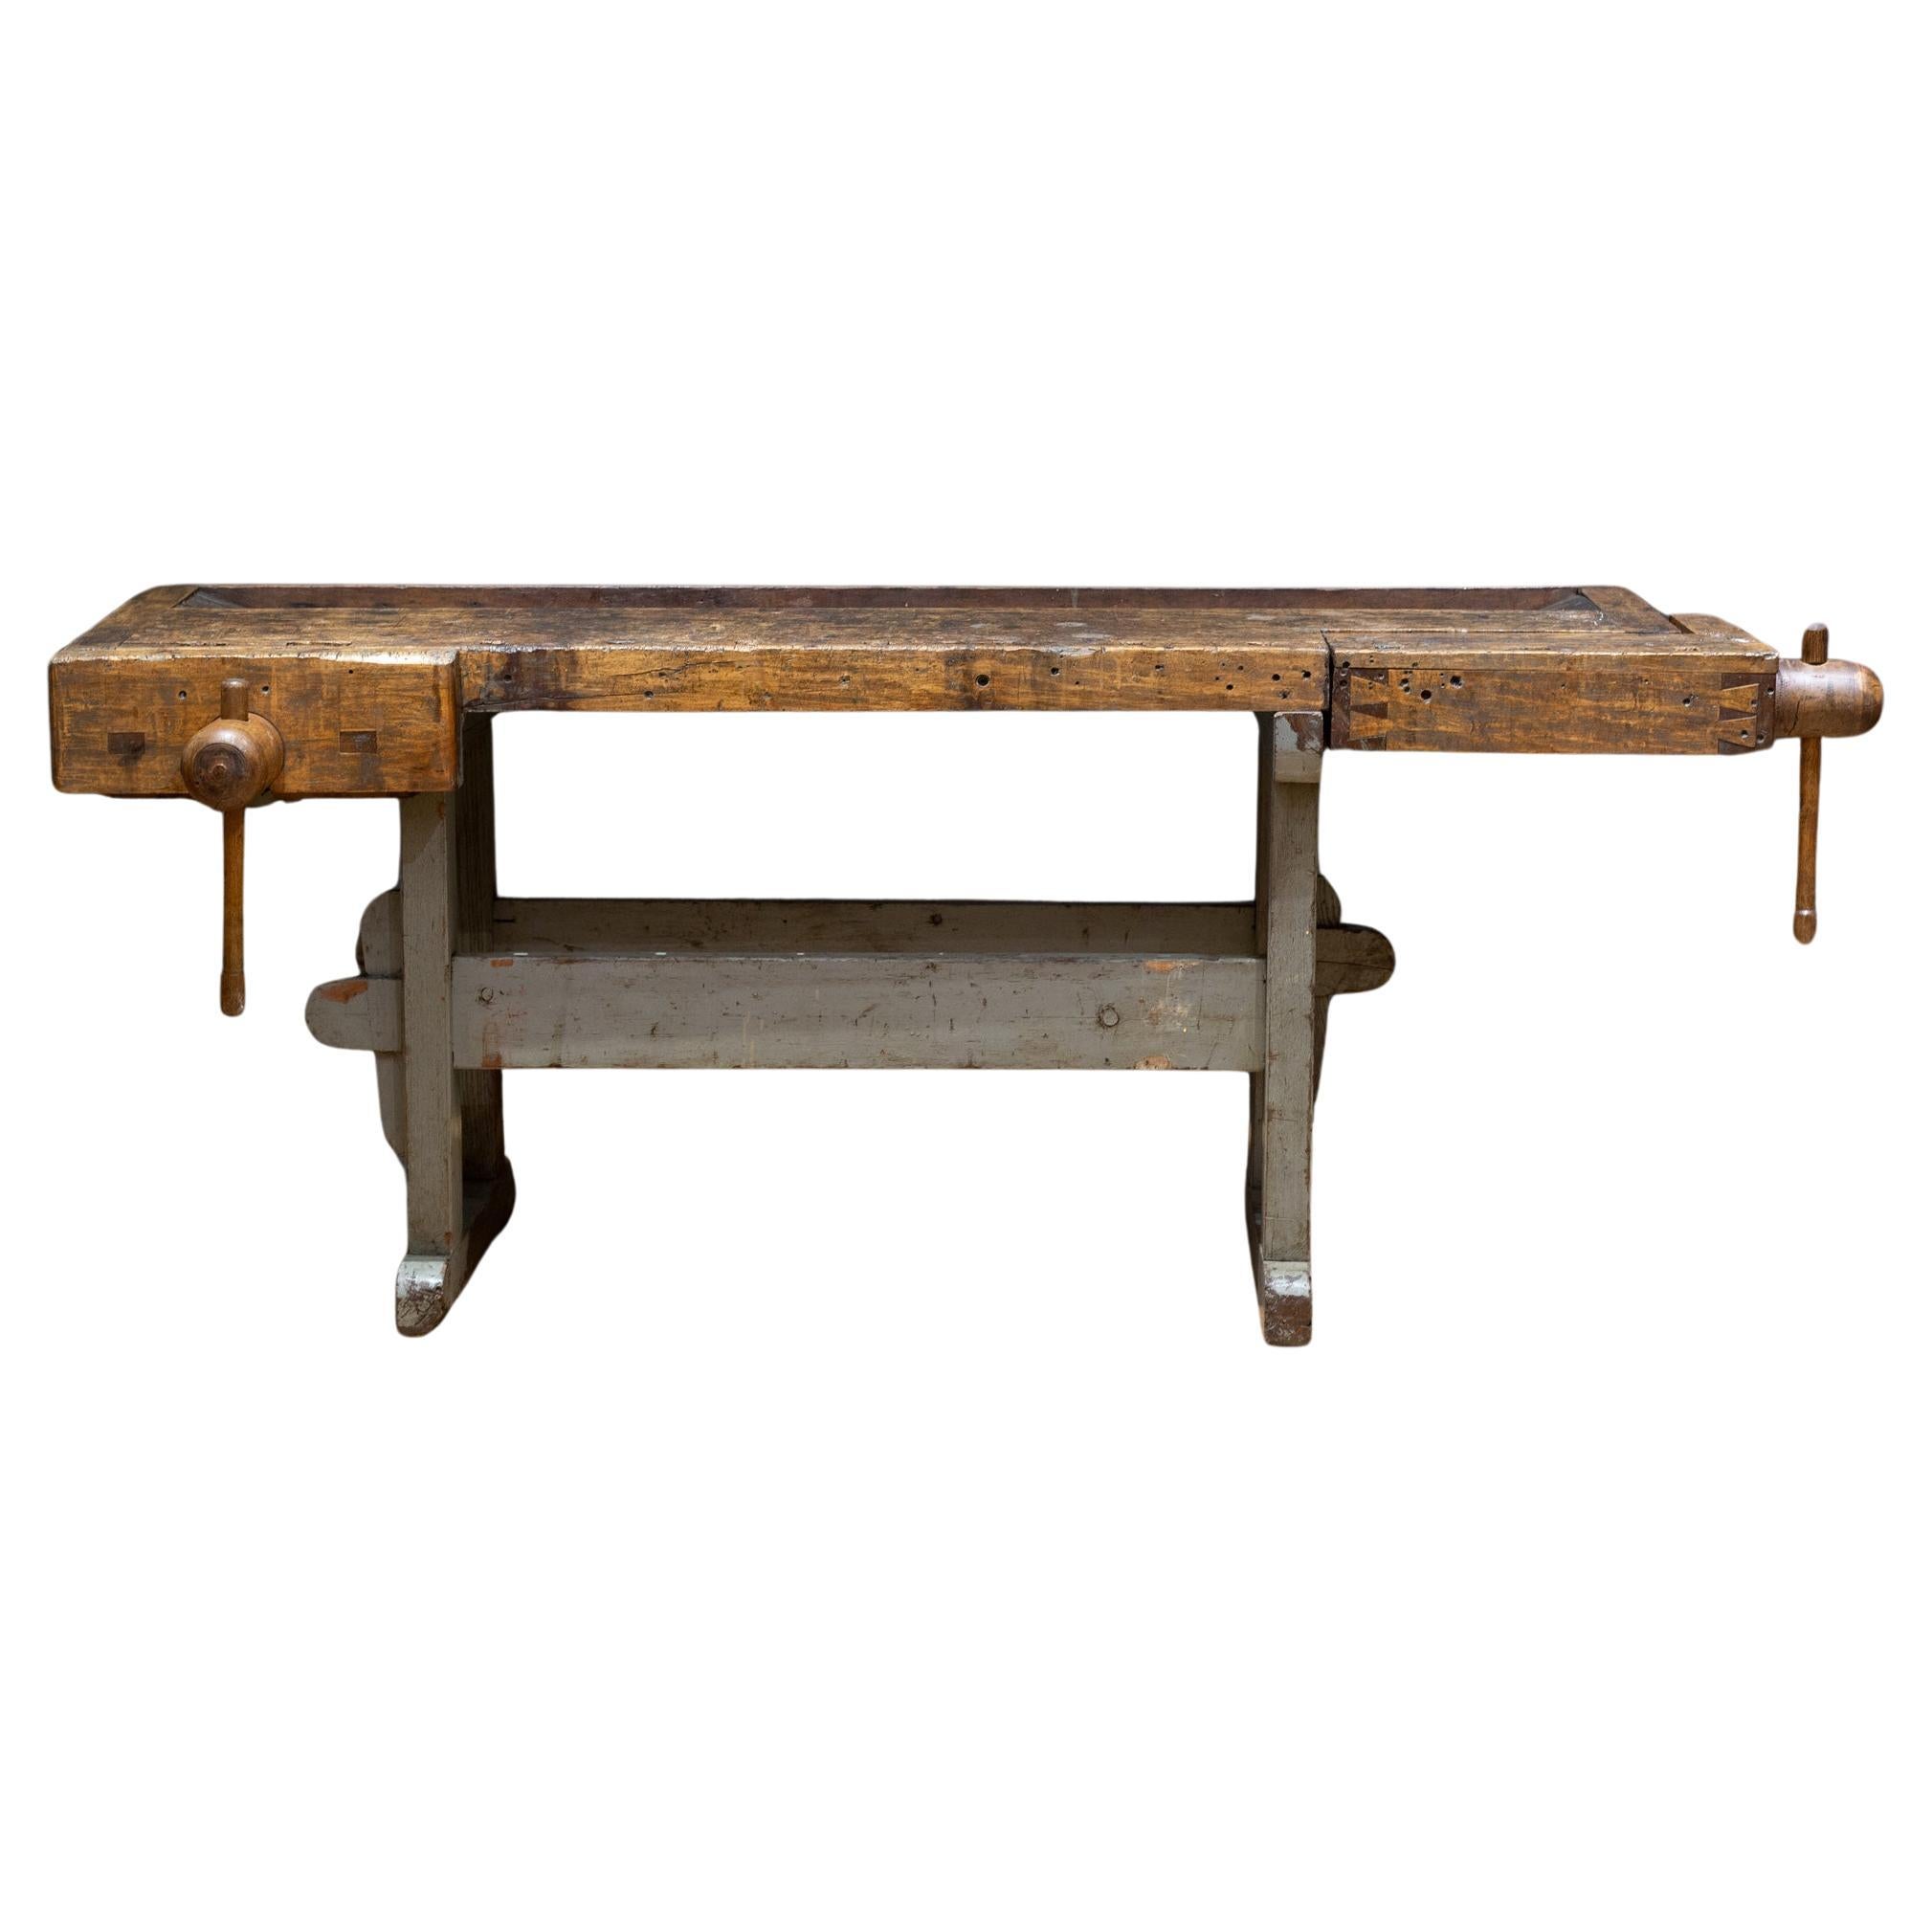 Late 19th c. American Carpenter's Workbench, c.1900 For Sale